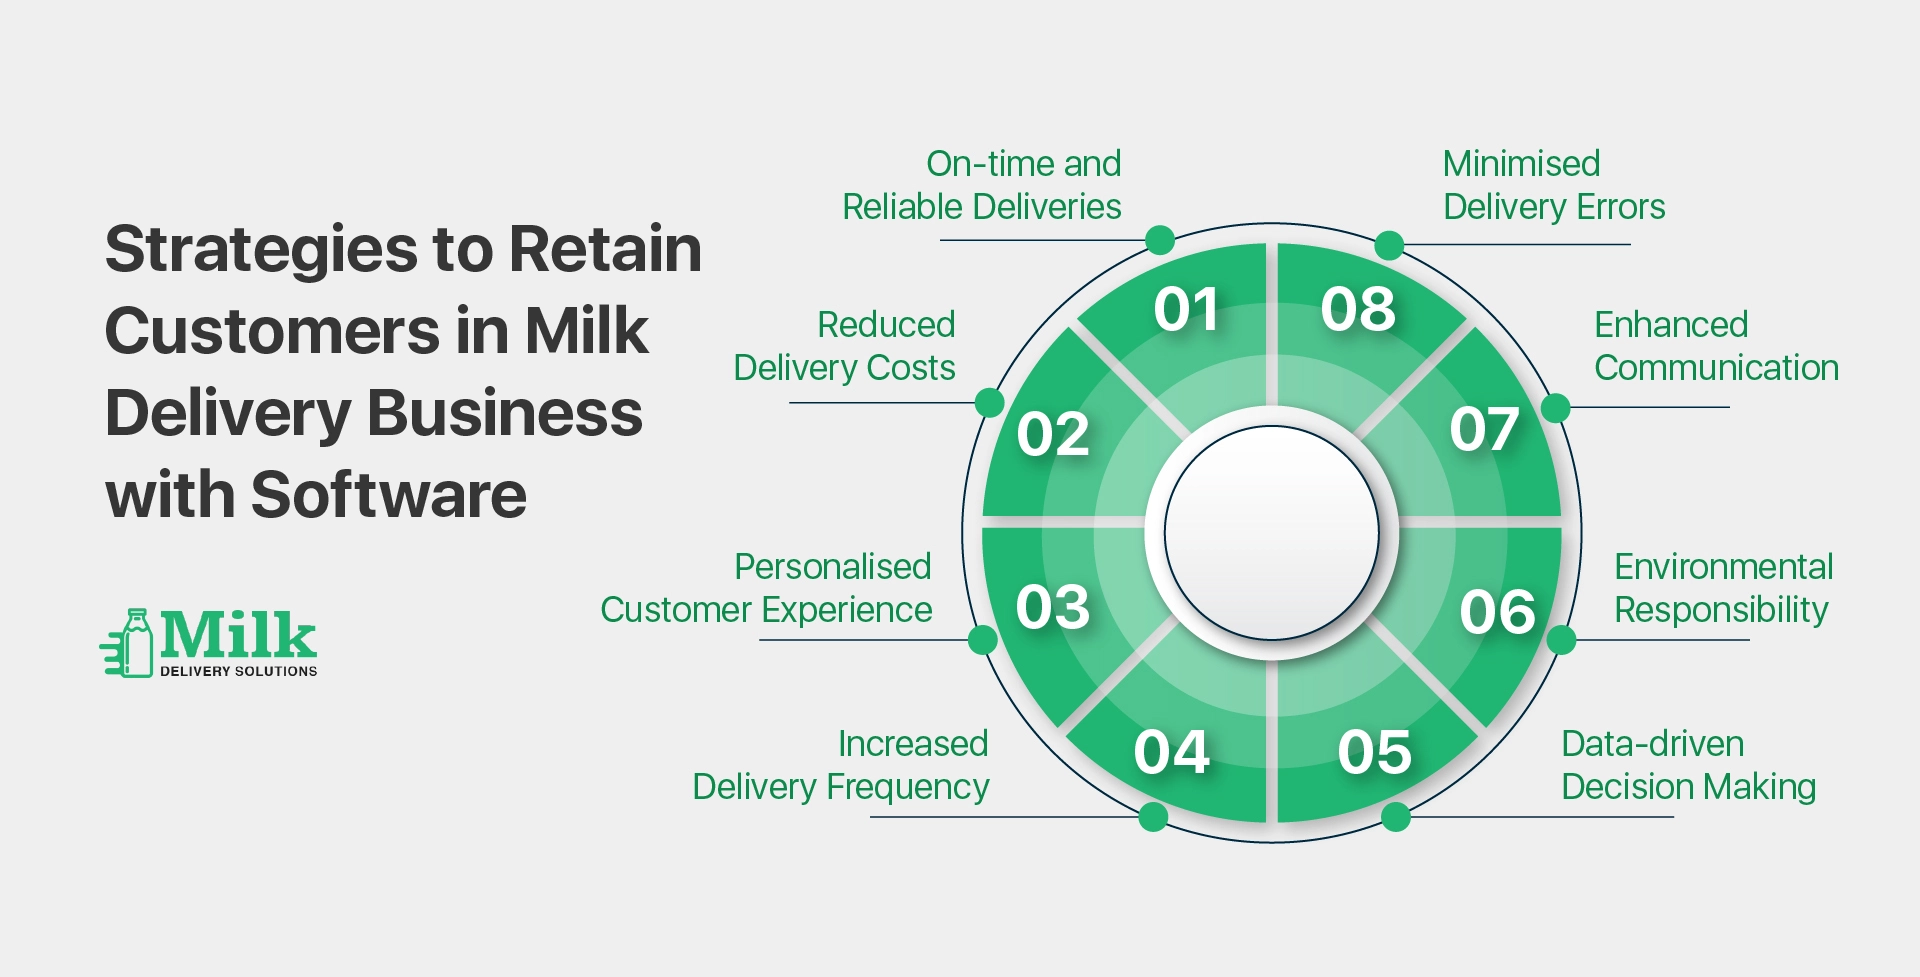 ravi garg, mds, strategies, retain customers, milk delivery business, software, on-time deliveries, delivery costs, customer experience, environmental responsibilities, data driven decision